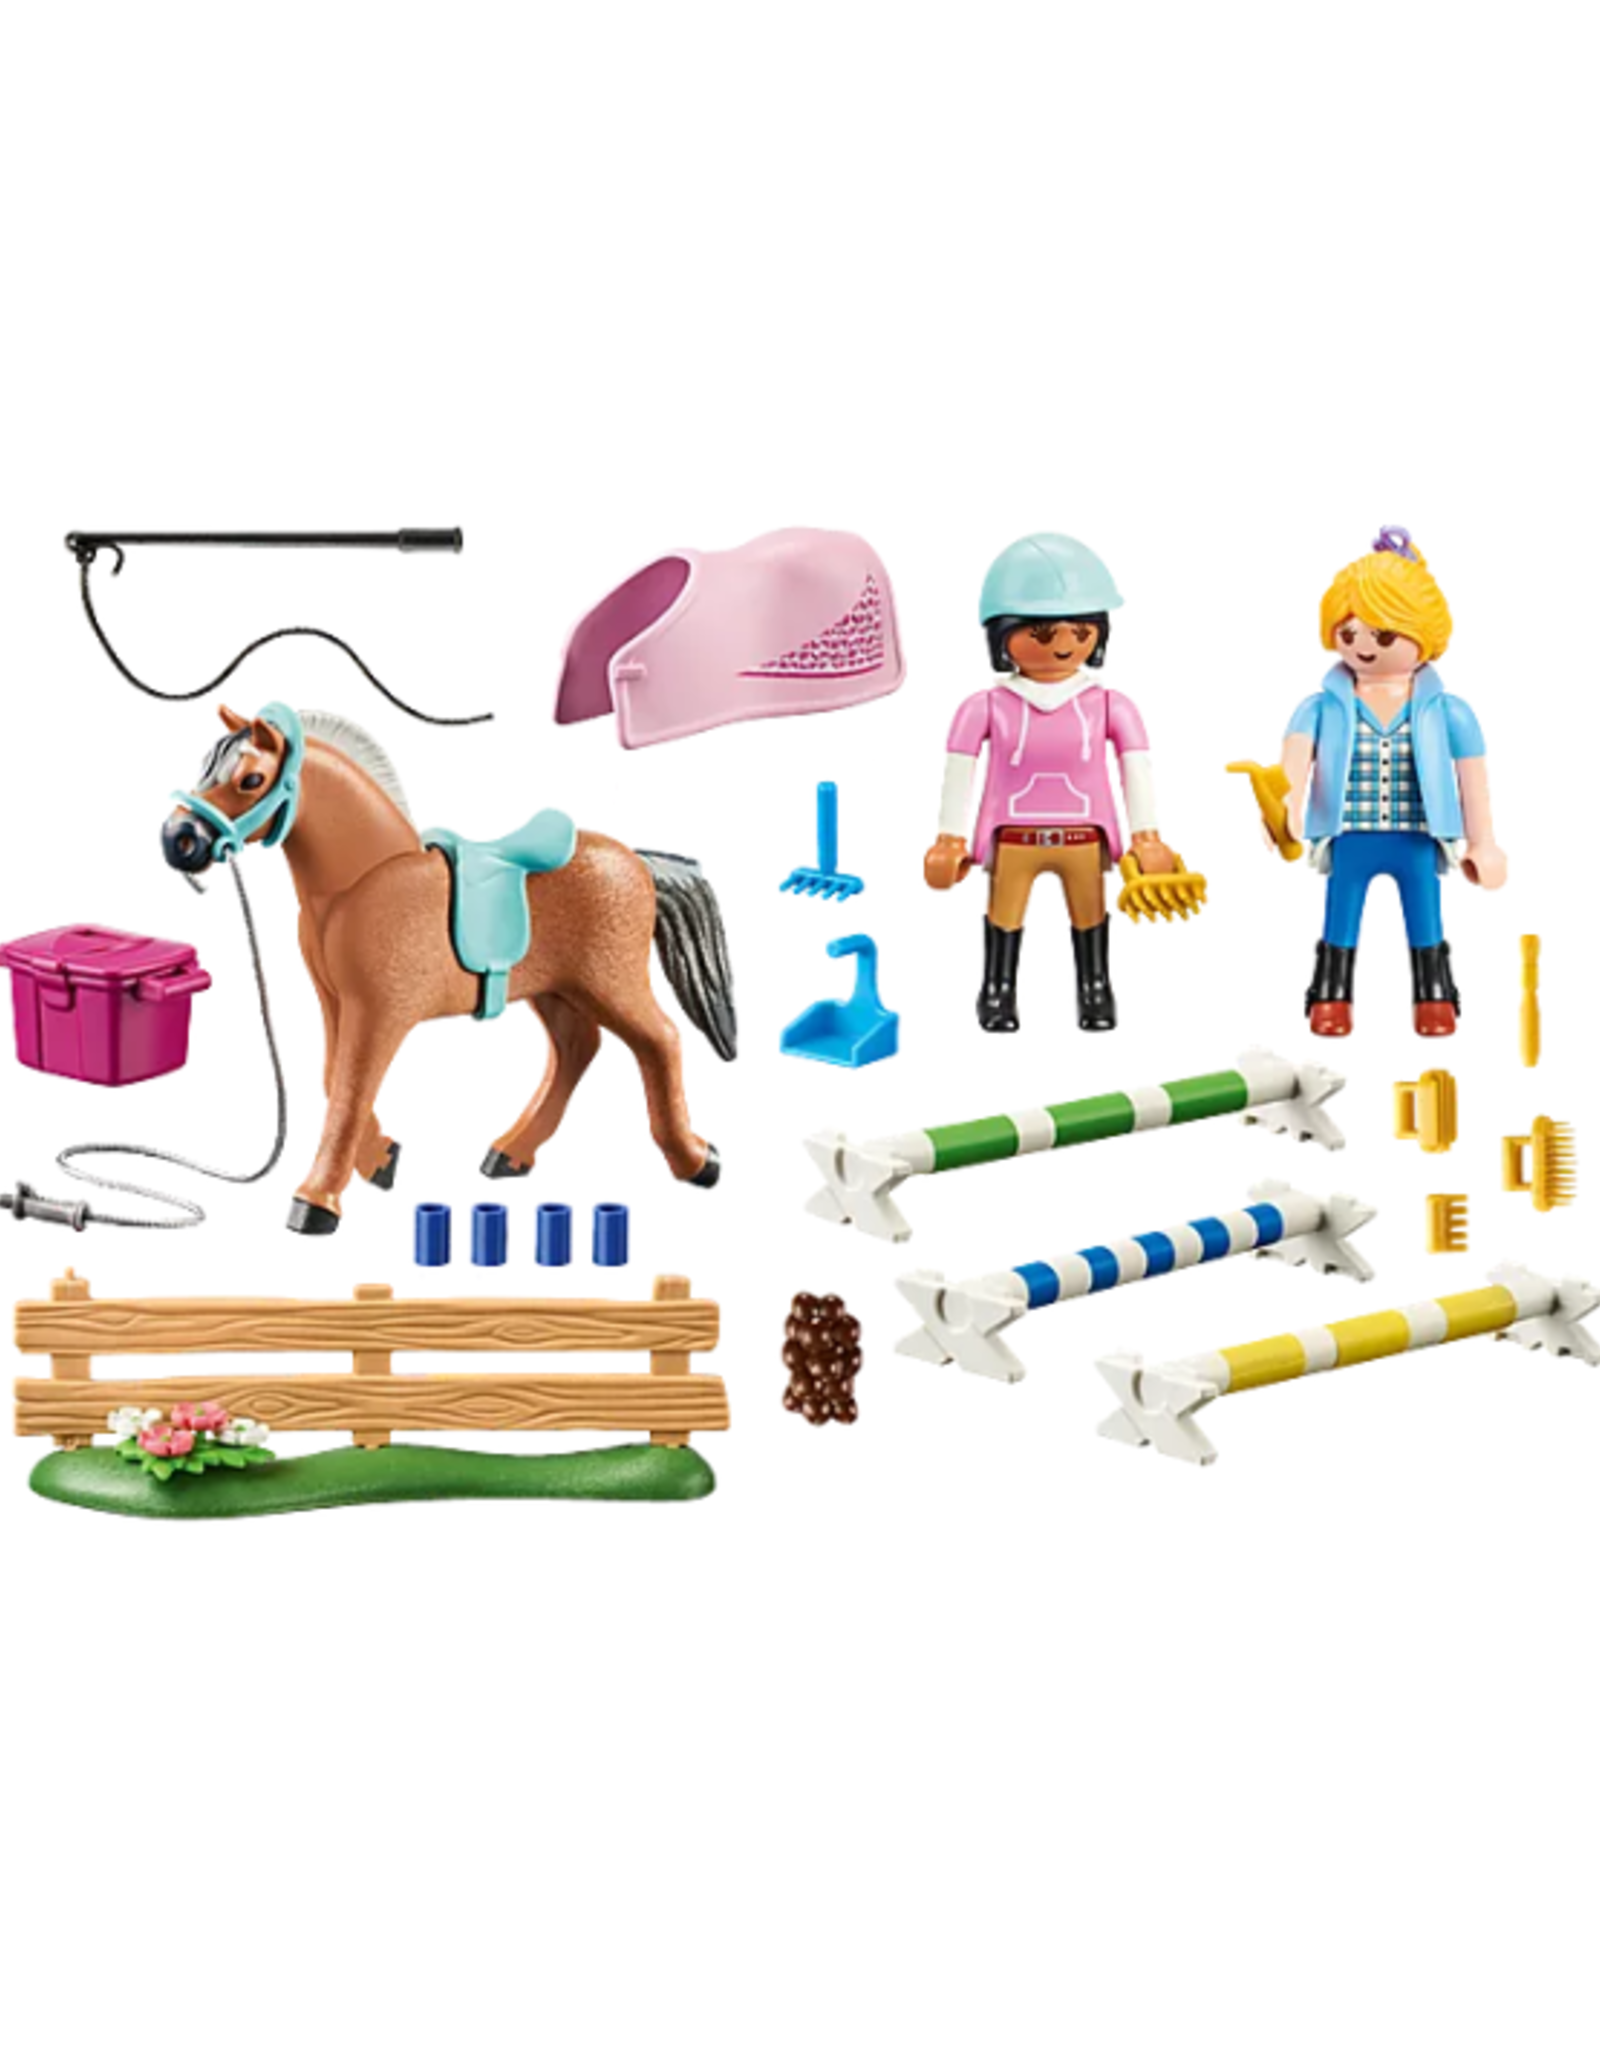 Playmobil Playmobil - Country - 71242 - Riding Lessons